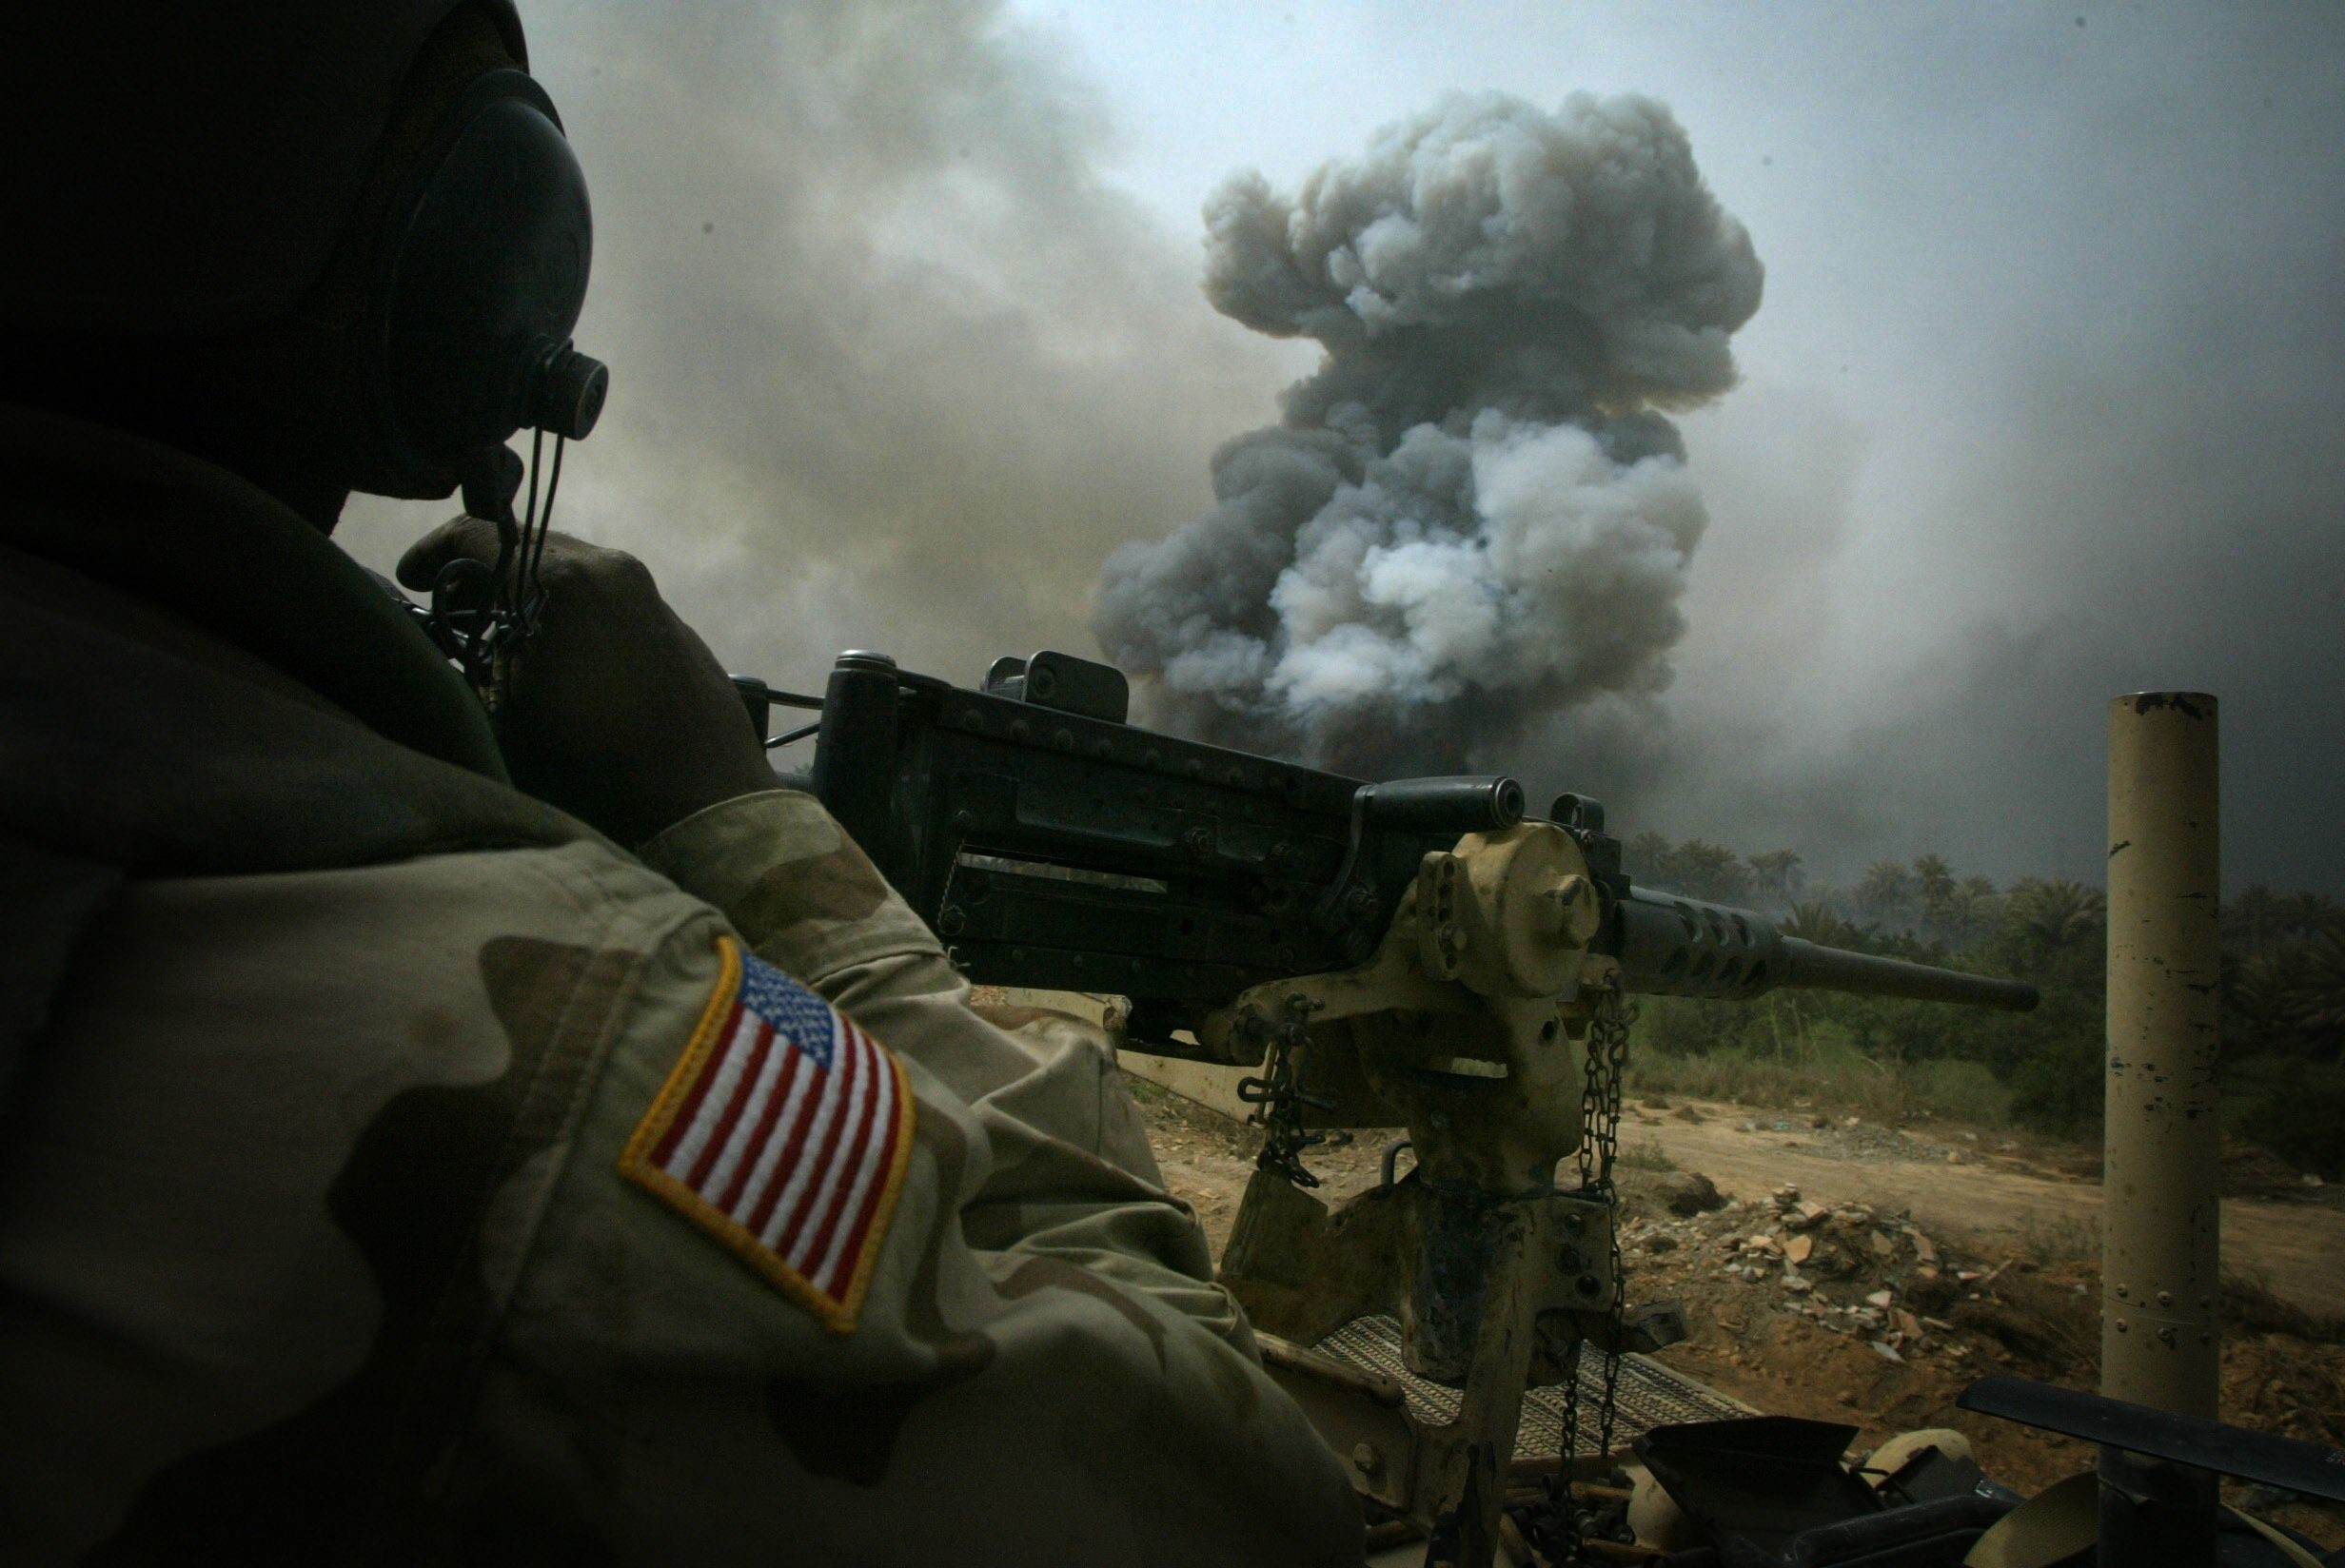 2464x1648 United States Army HD Wallpaper | Background Image |  | ID:58977 -  Wallpaper Abyss